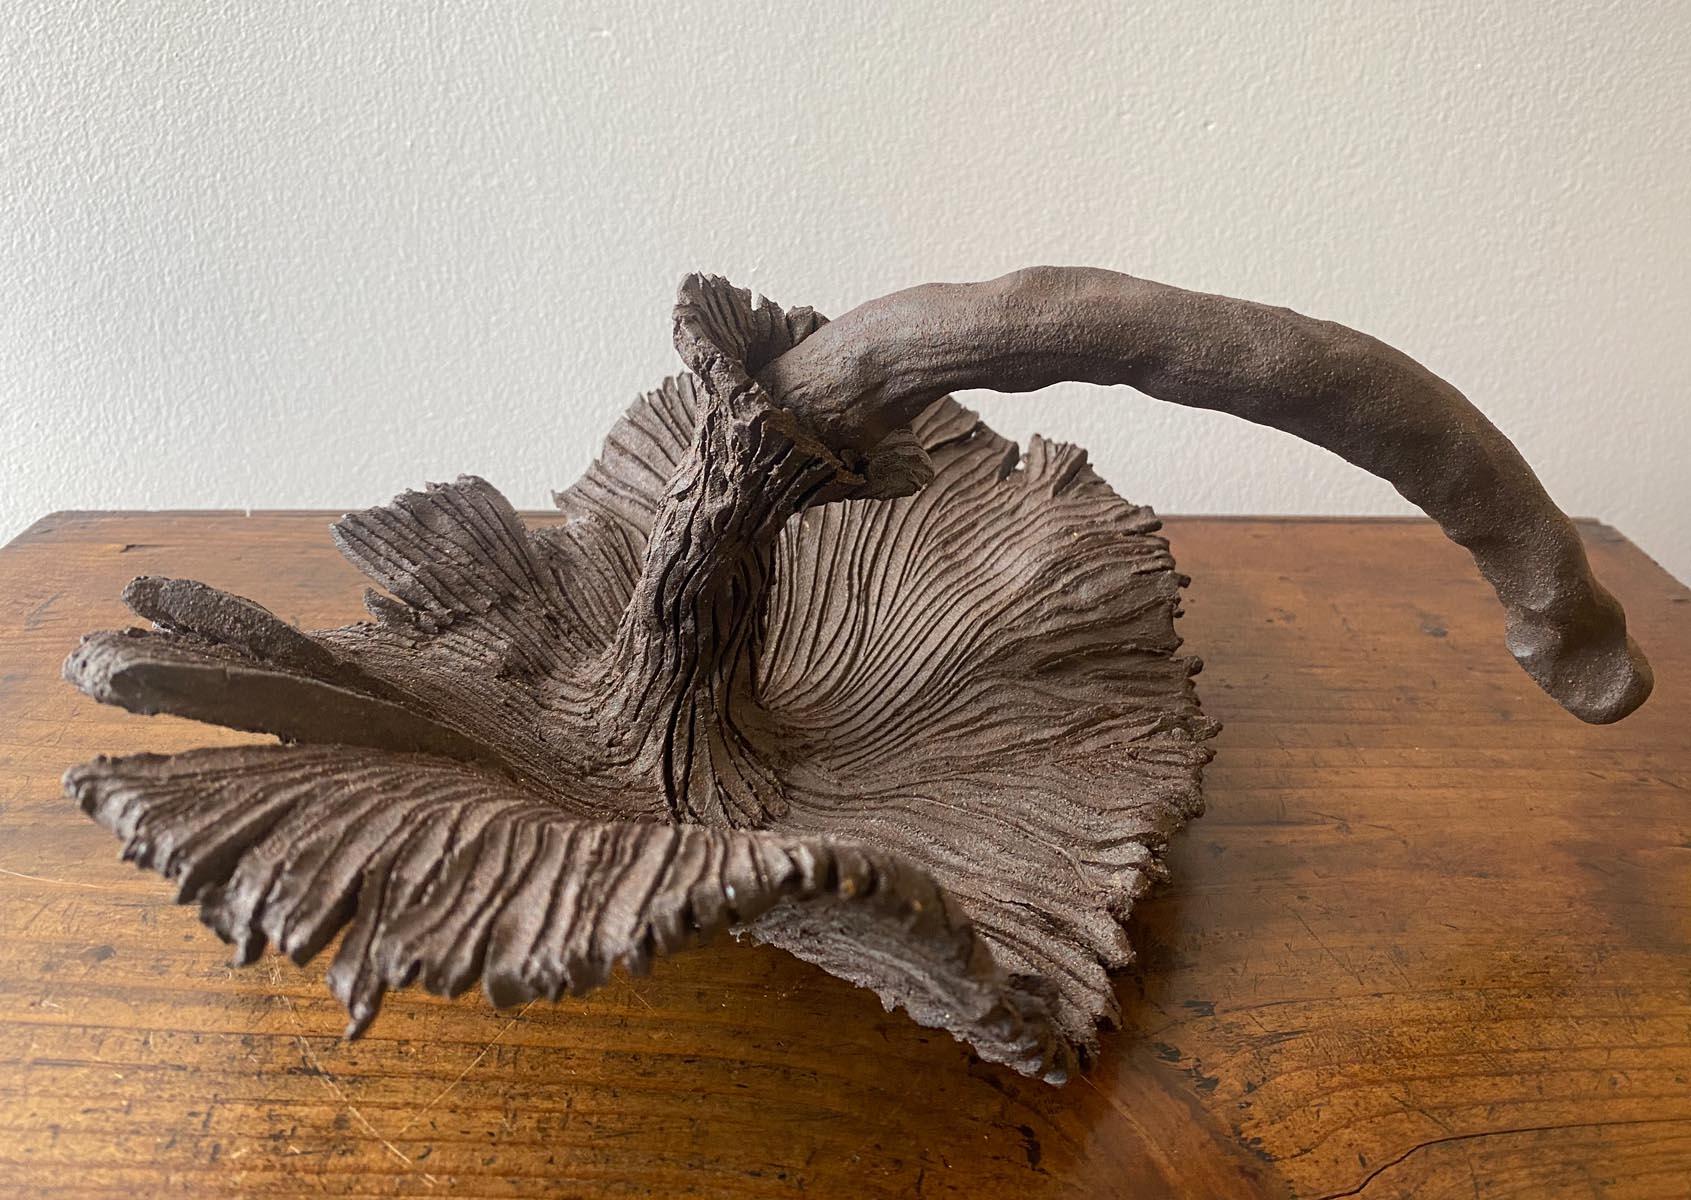 Hand built clay large scale mushroom by ceramic artist Sally Terrell of Santa Barbara, California. Dark, high fired clay, unglazed. Interesting shapes! Perfect conversational piece for a console or coffee table.